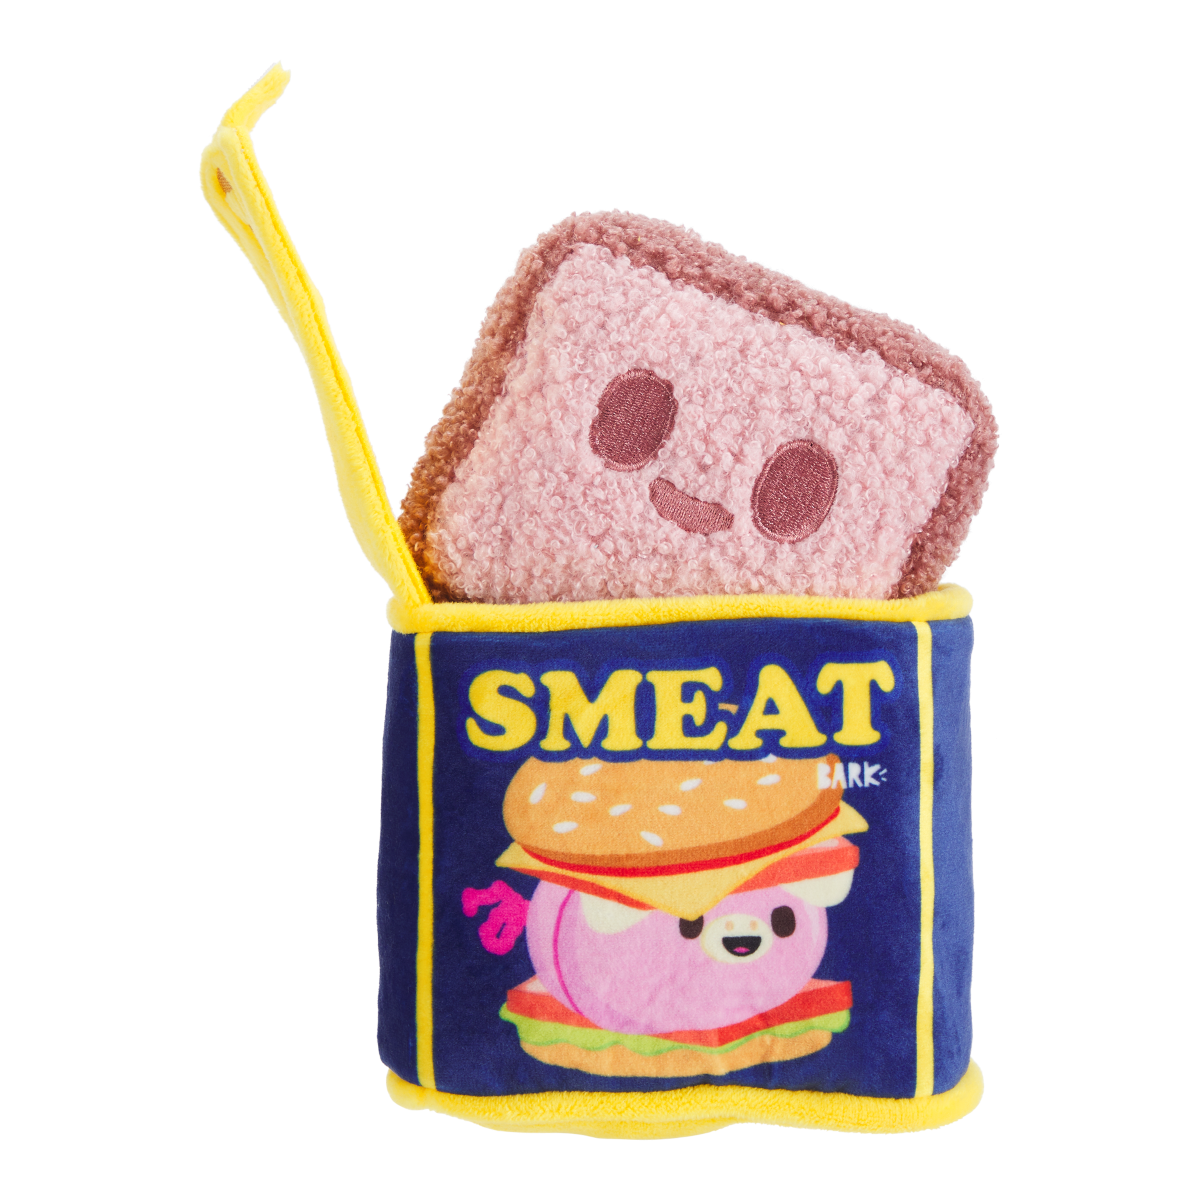 Canned Smeat